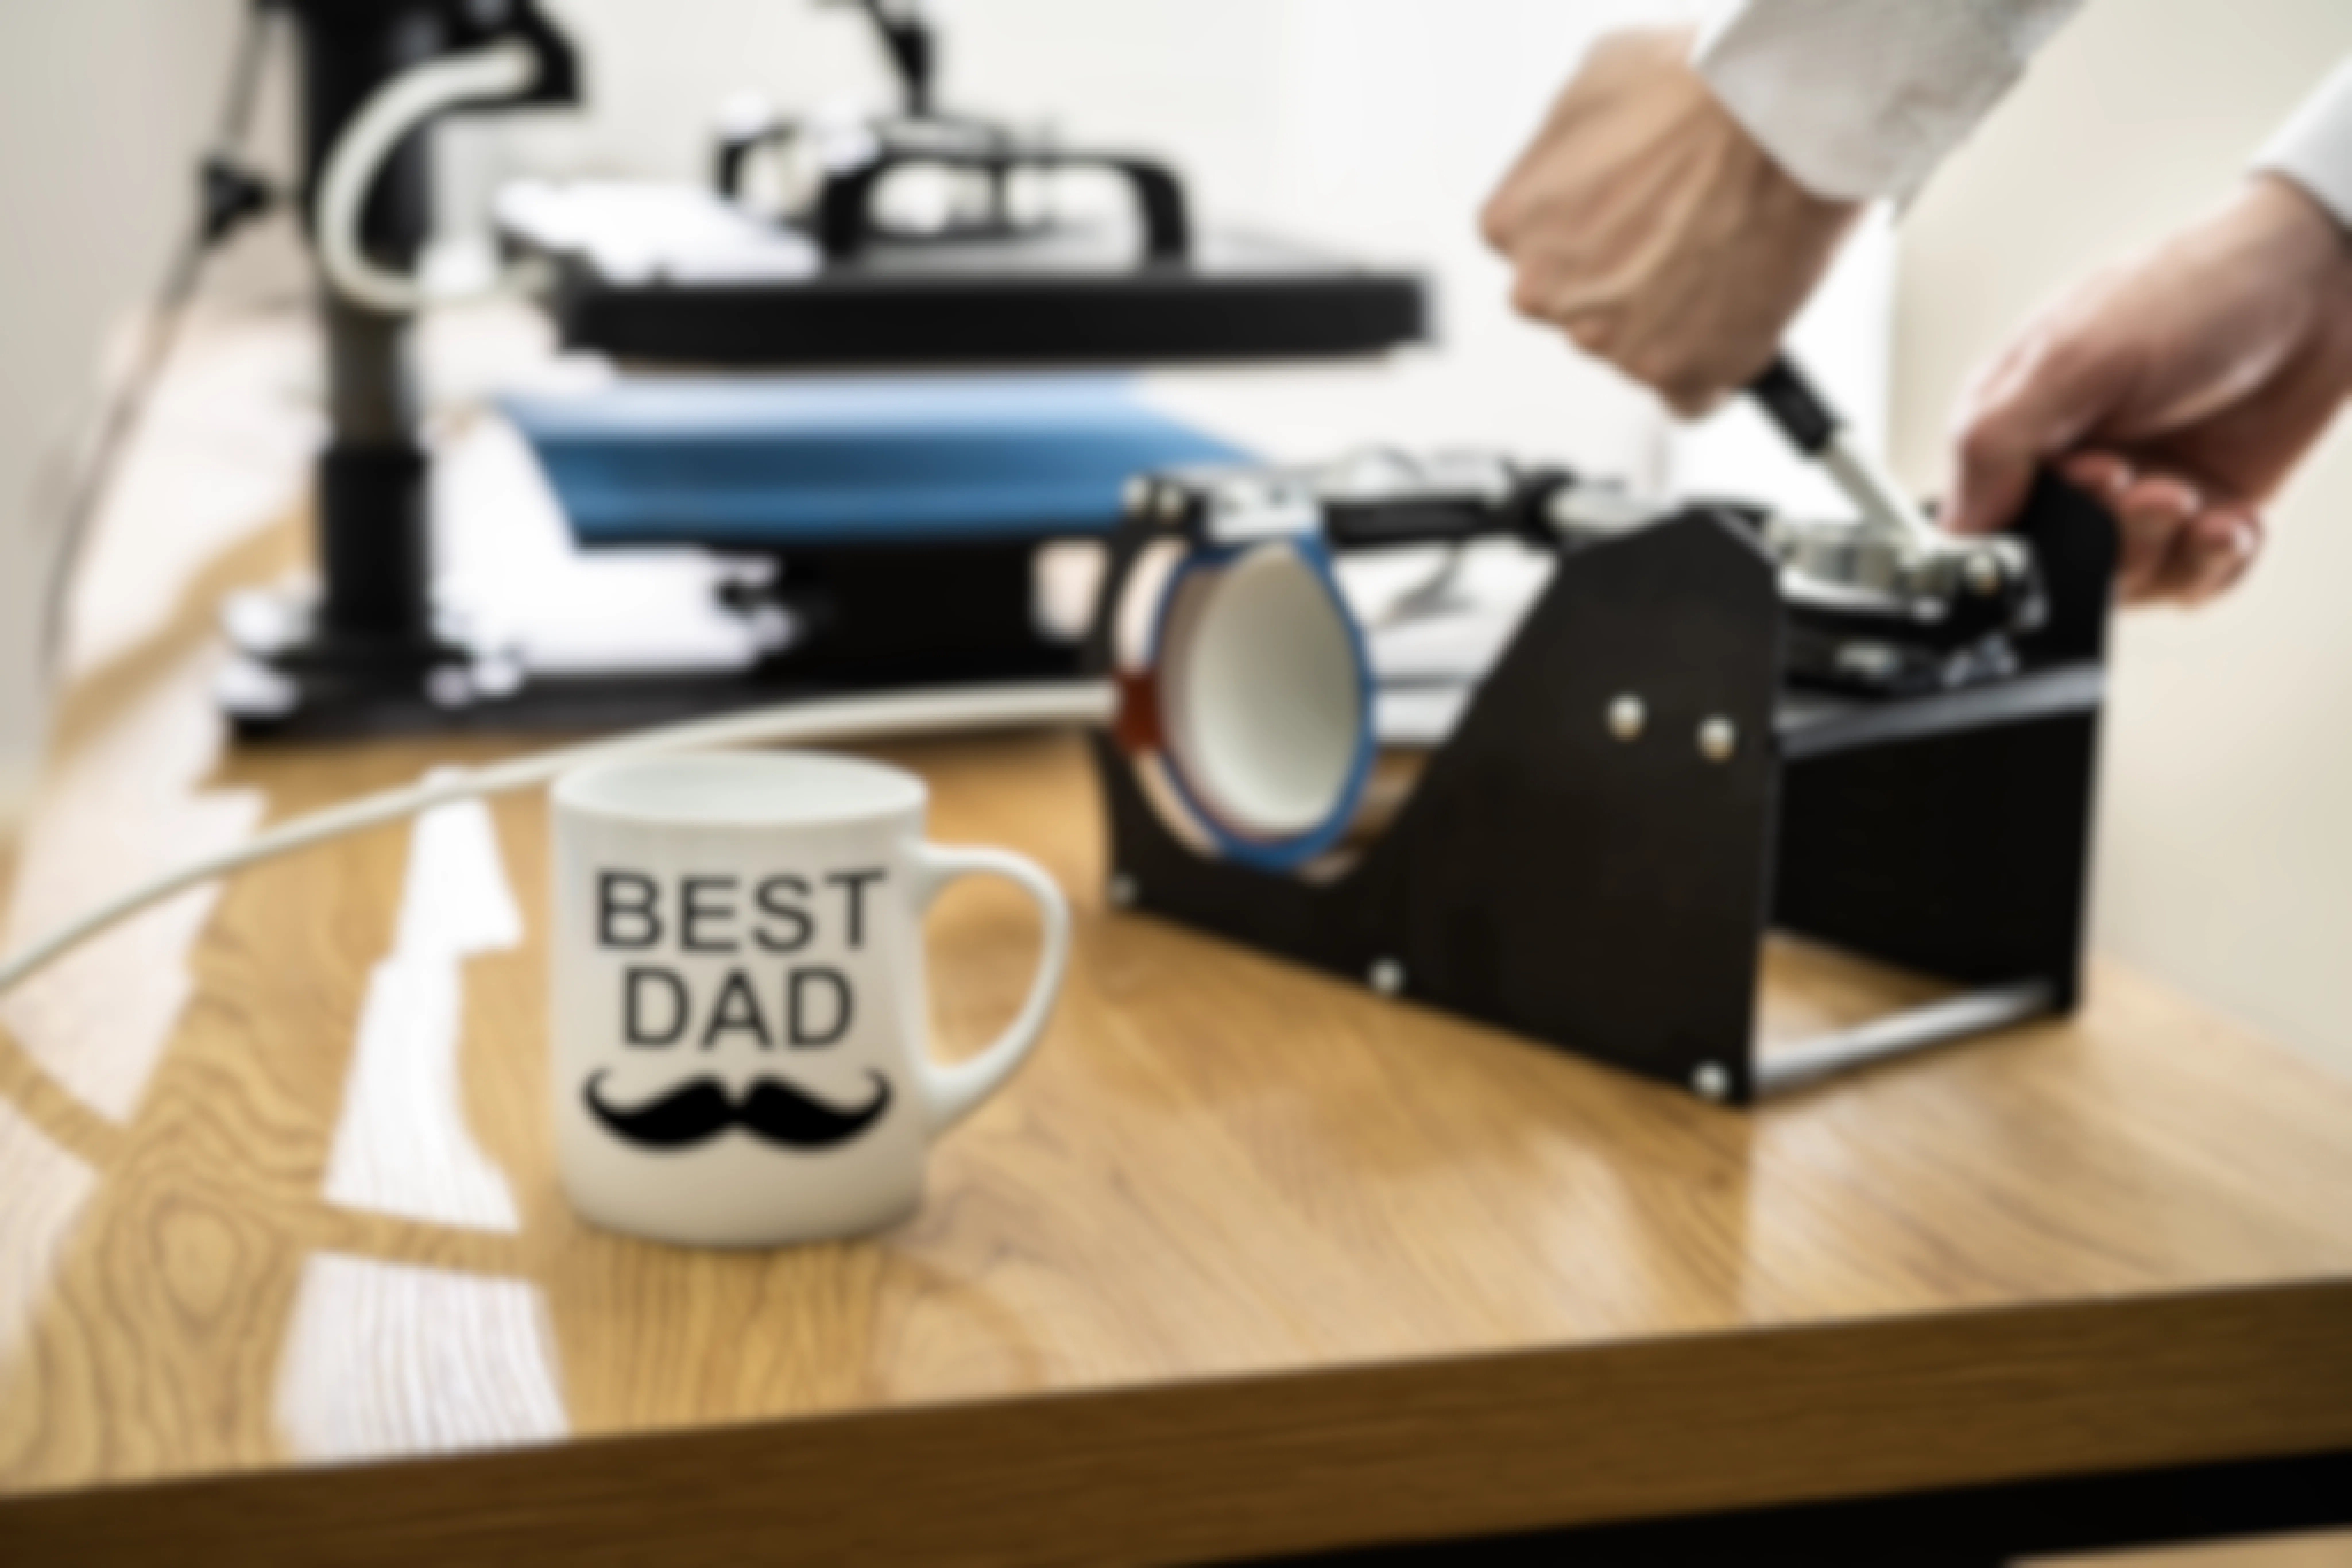 Heat transfer press with mug that says : best dad" in the fore ground